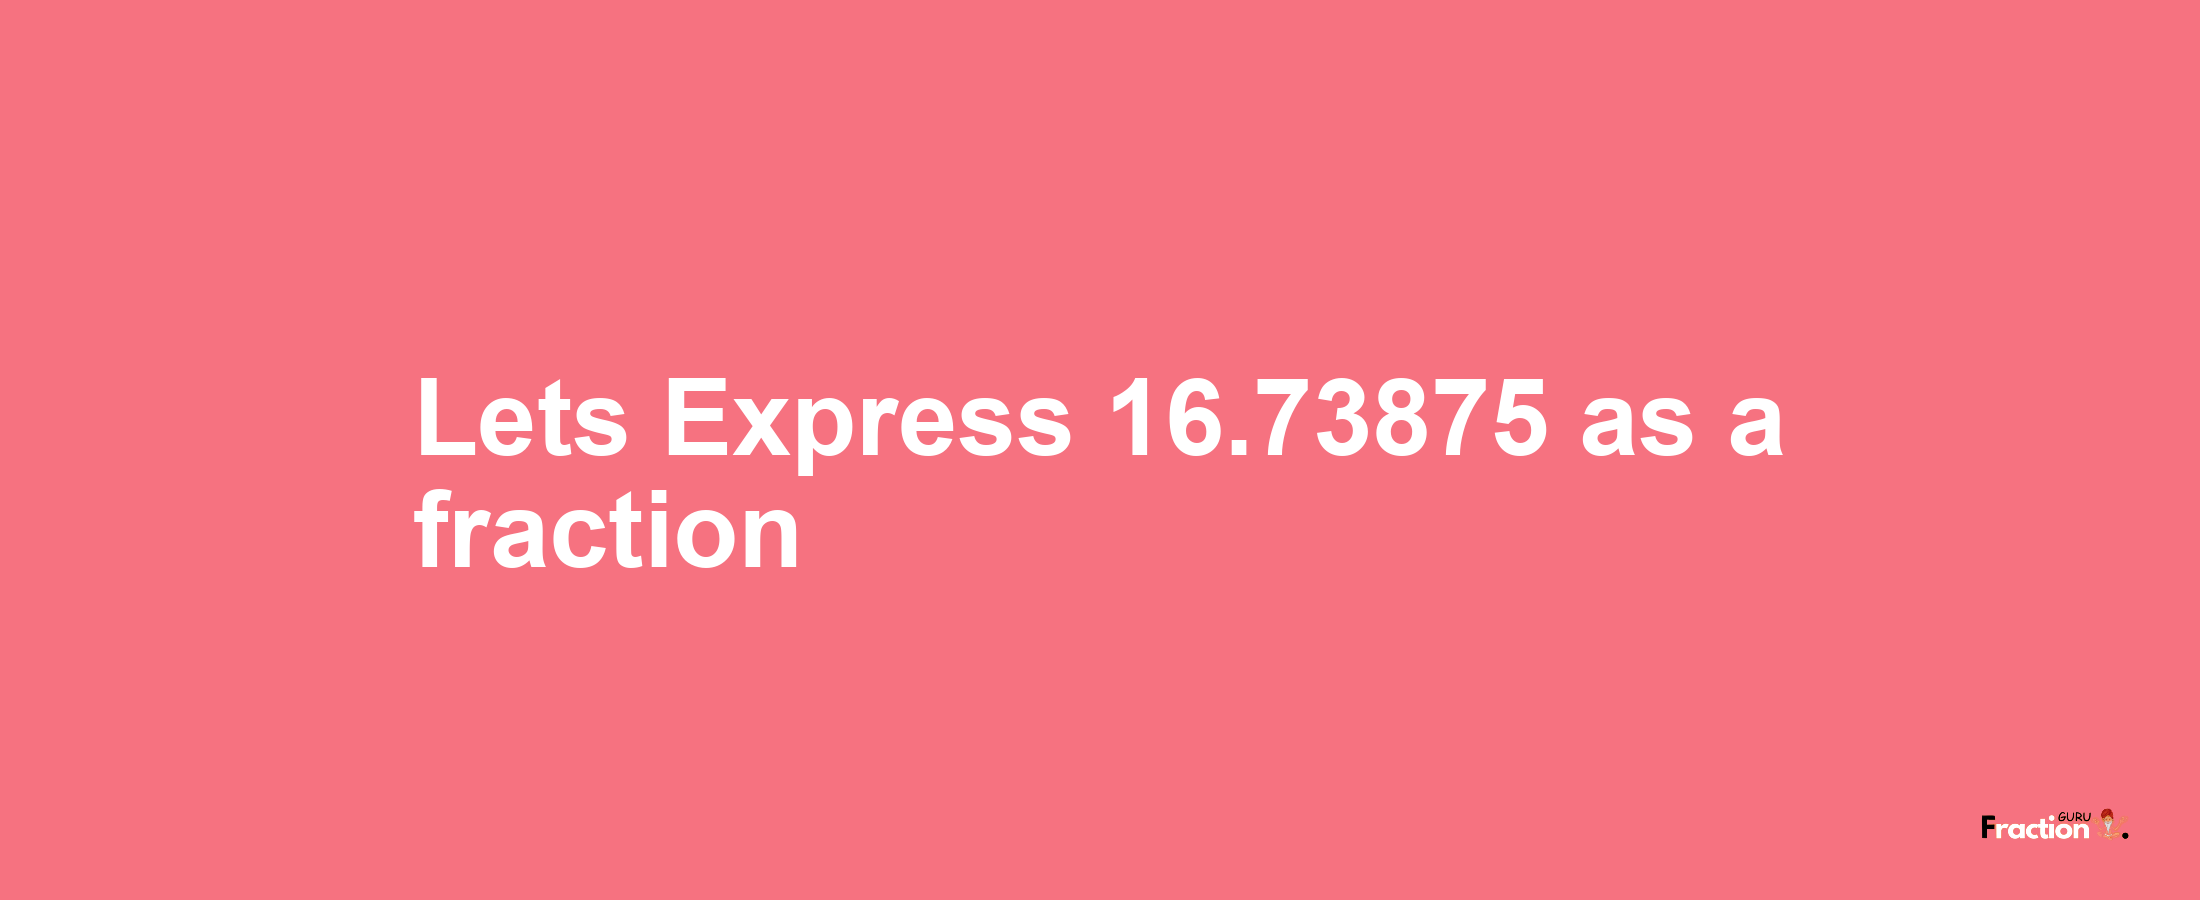 Lets Express 16.73875 as afraction